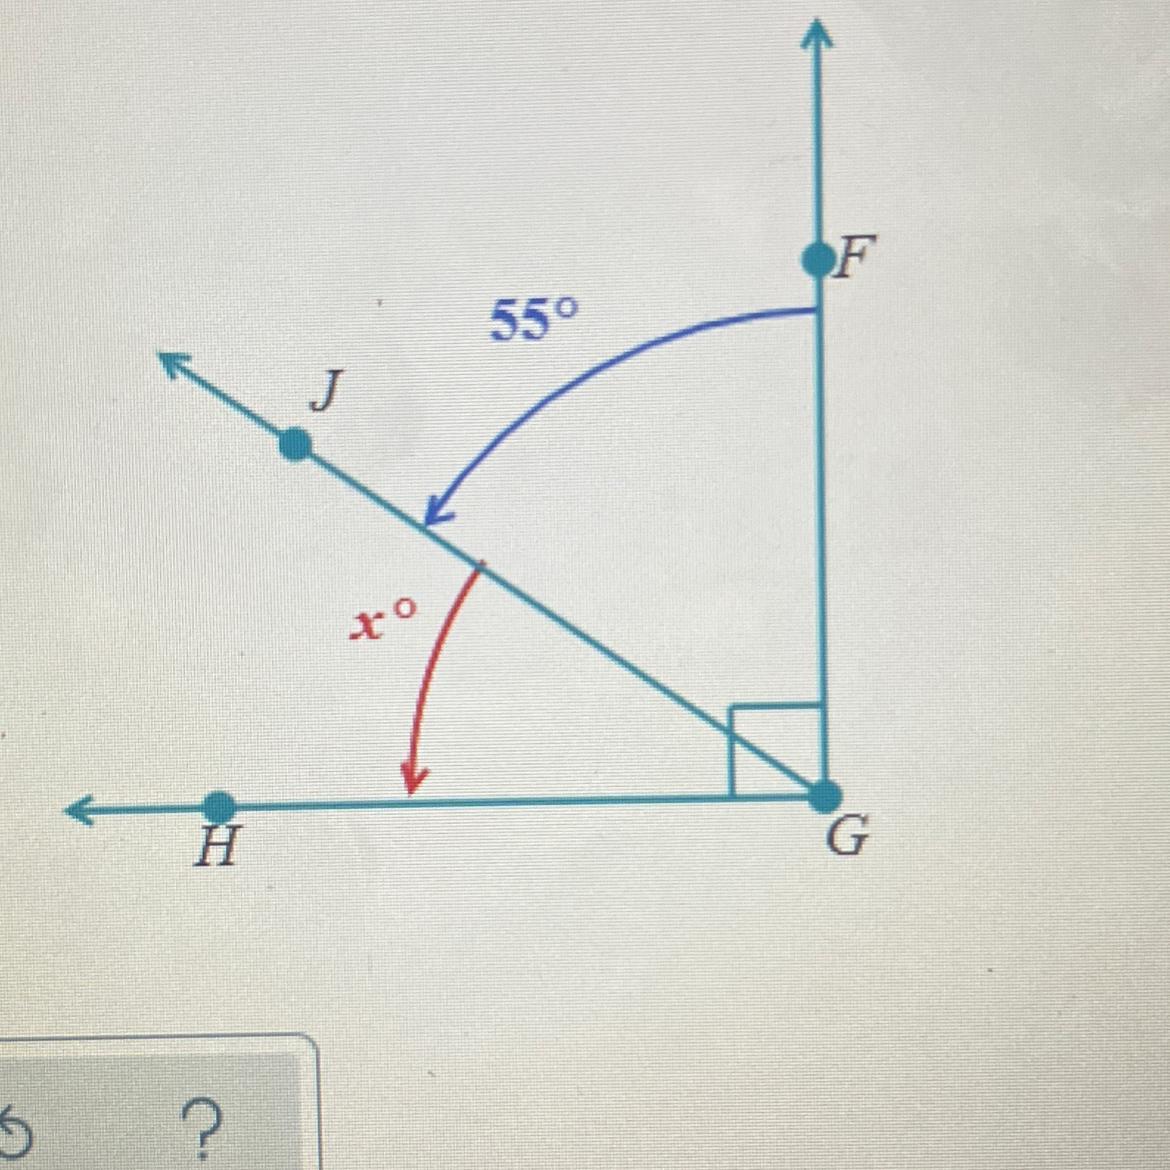 55Angle FGH Is A Right Angle.The Measure Of Angle FGJ Is 559.The Measure Of Angle JGH Is X.What Is The